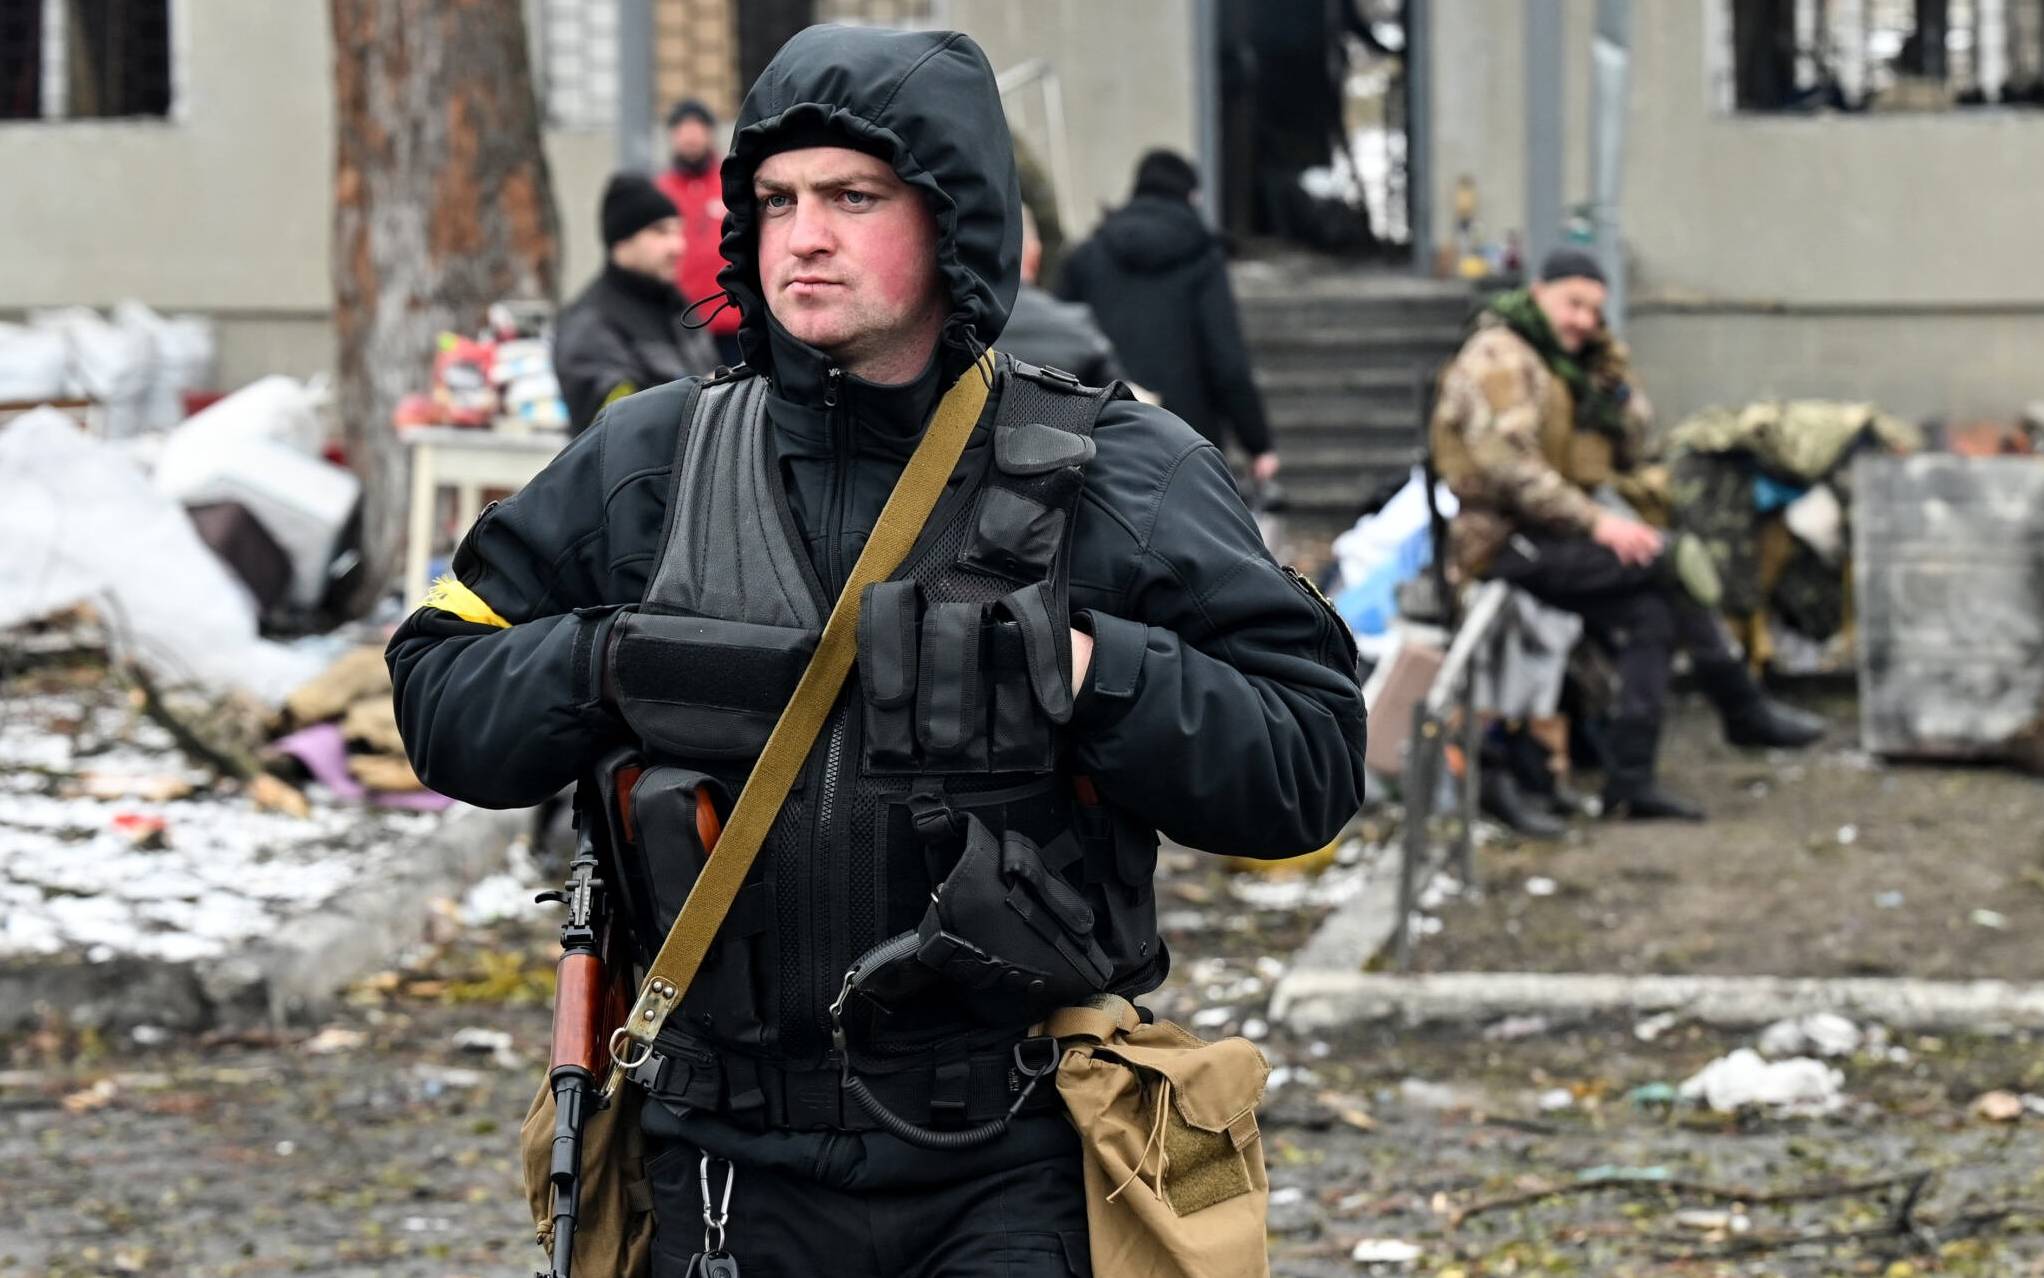 Armed man stands on a check-point in the city of Brovary outside Kyiv on March 1, 2022. - Russian troops will carry out an attack on the infrastructure of Ukraine's security services in Kyiv and urged residents living nearby to leave, the defence ministry said on March 1, 2022. (Photo by Genya SAVILOV / AFP)